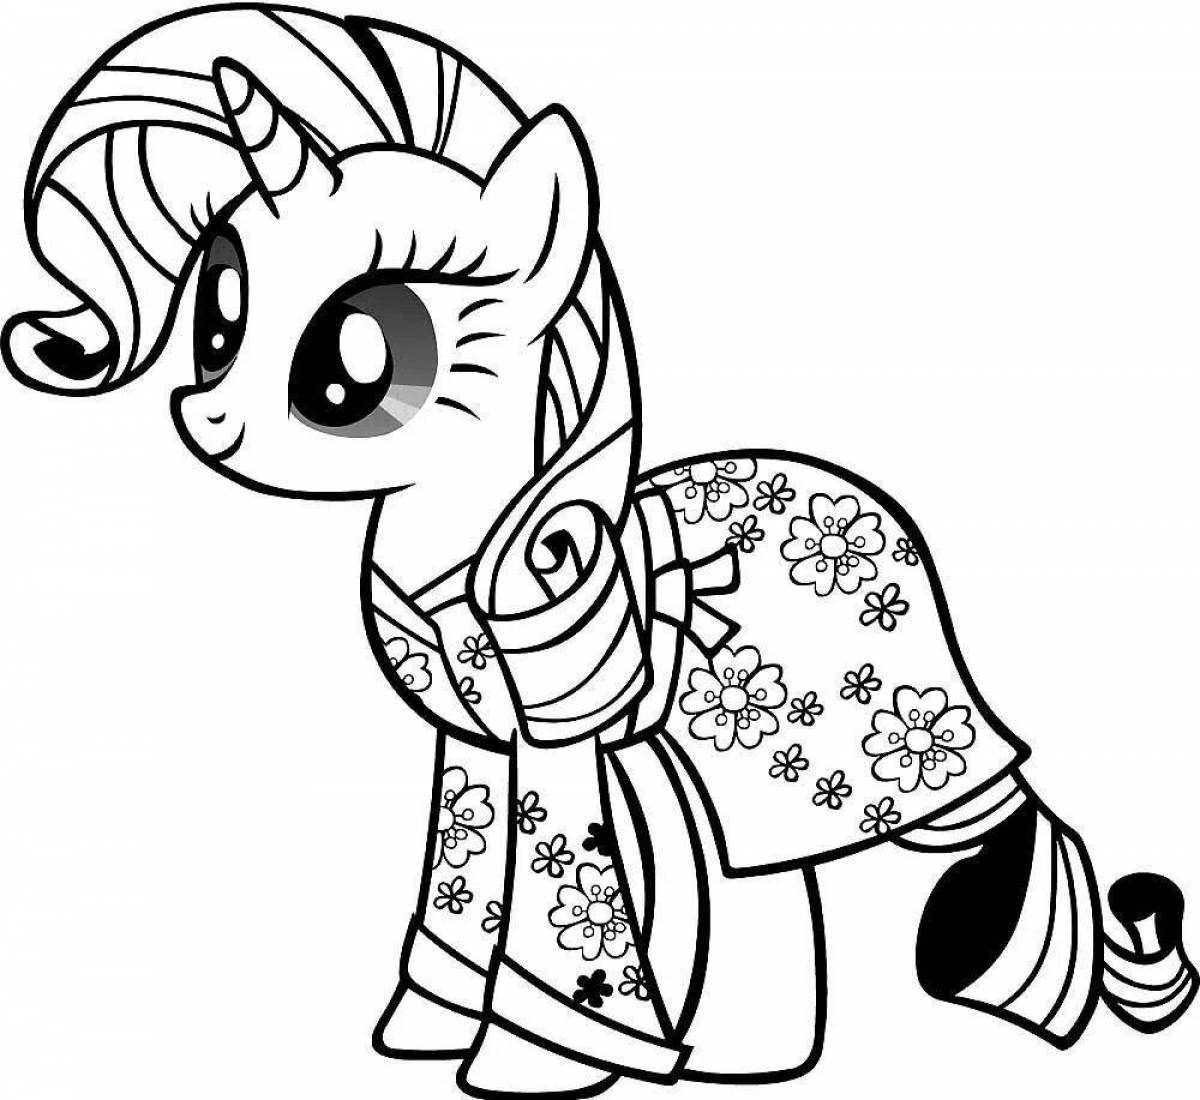 Coloring page with colorful pony